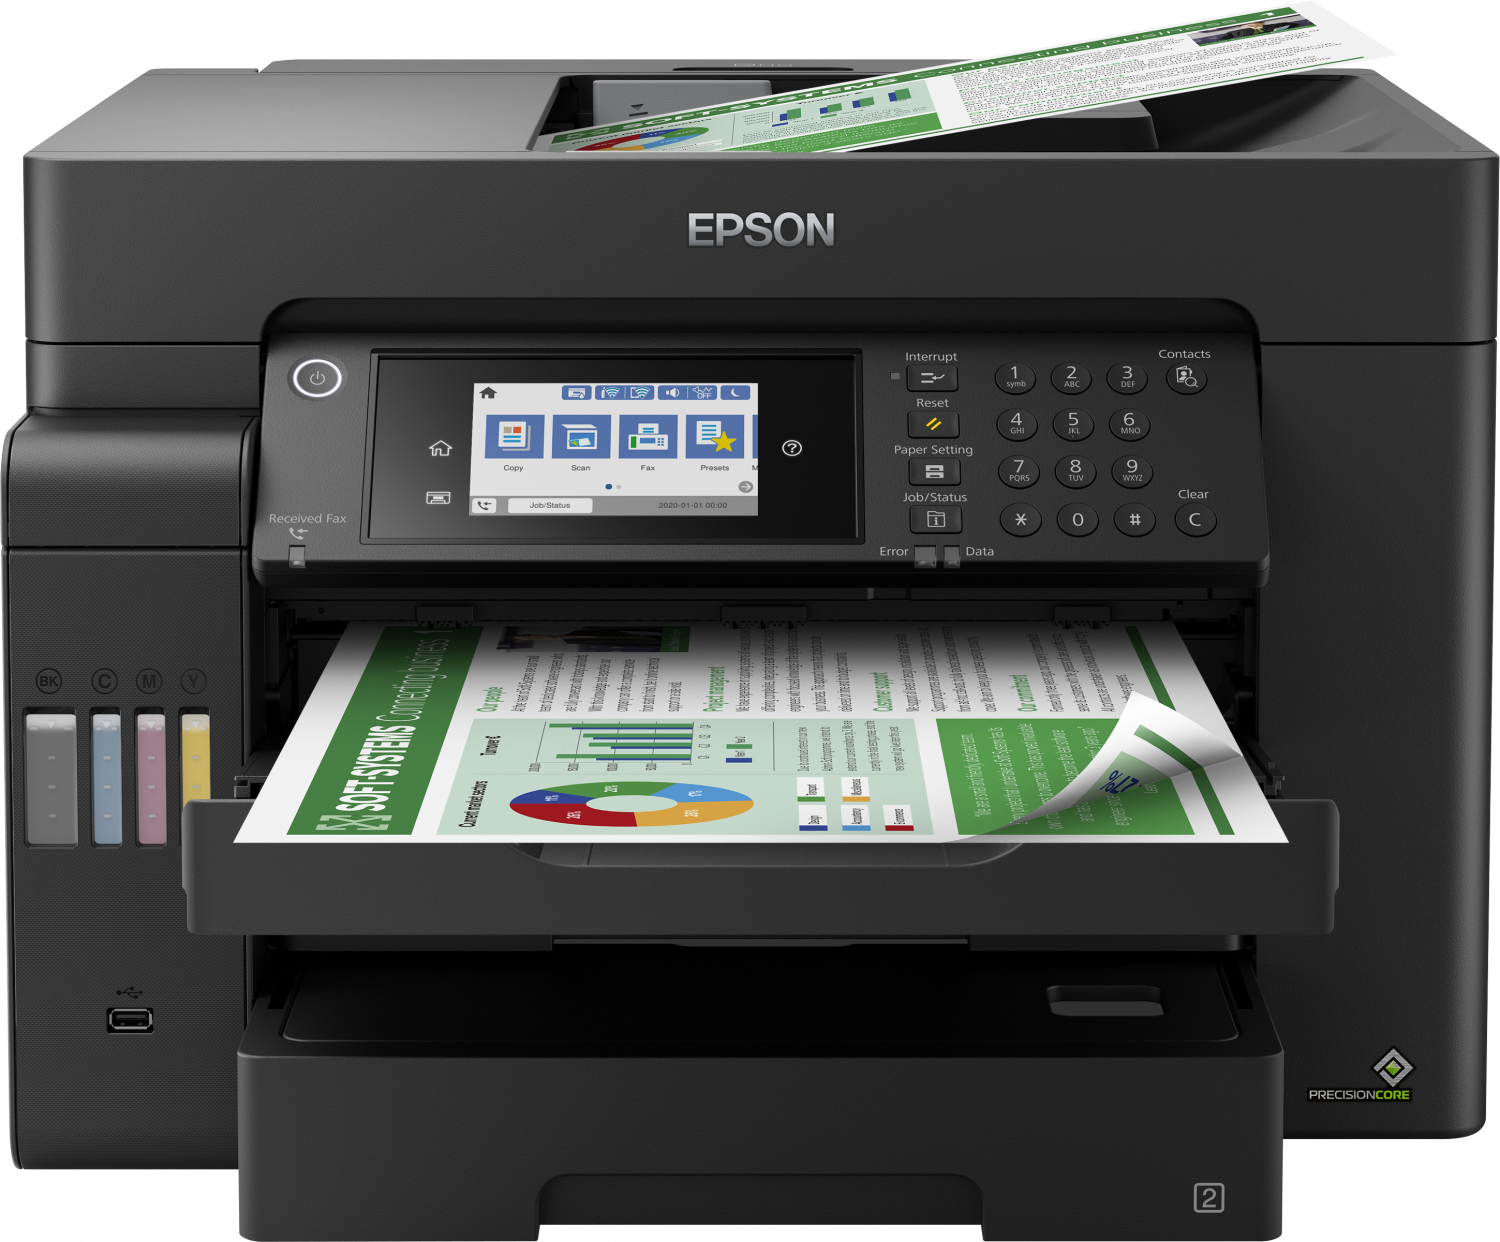 Step-by-step Driver Epson Printer ET-16600 Kali Linux Installation - Featured